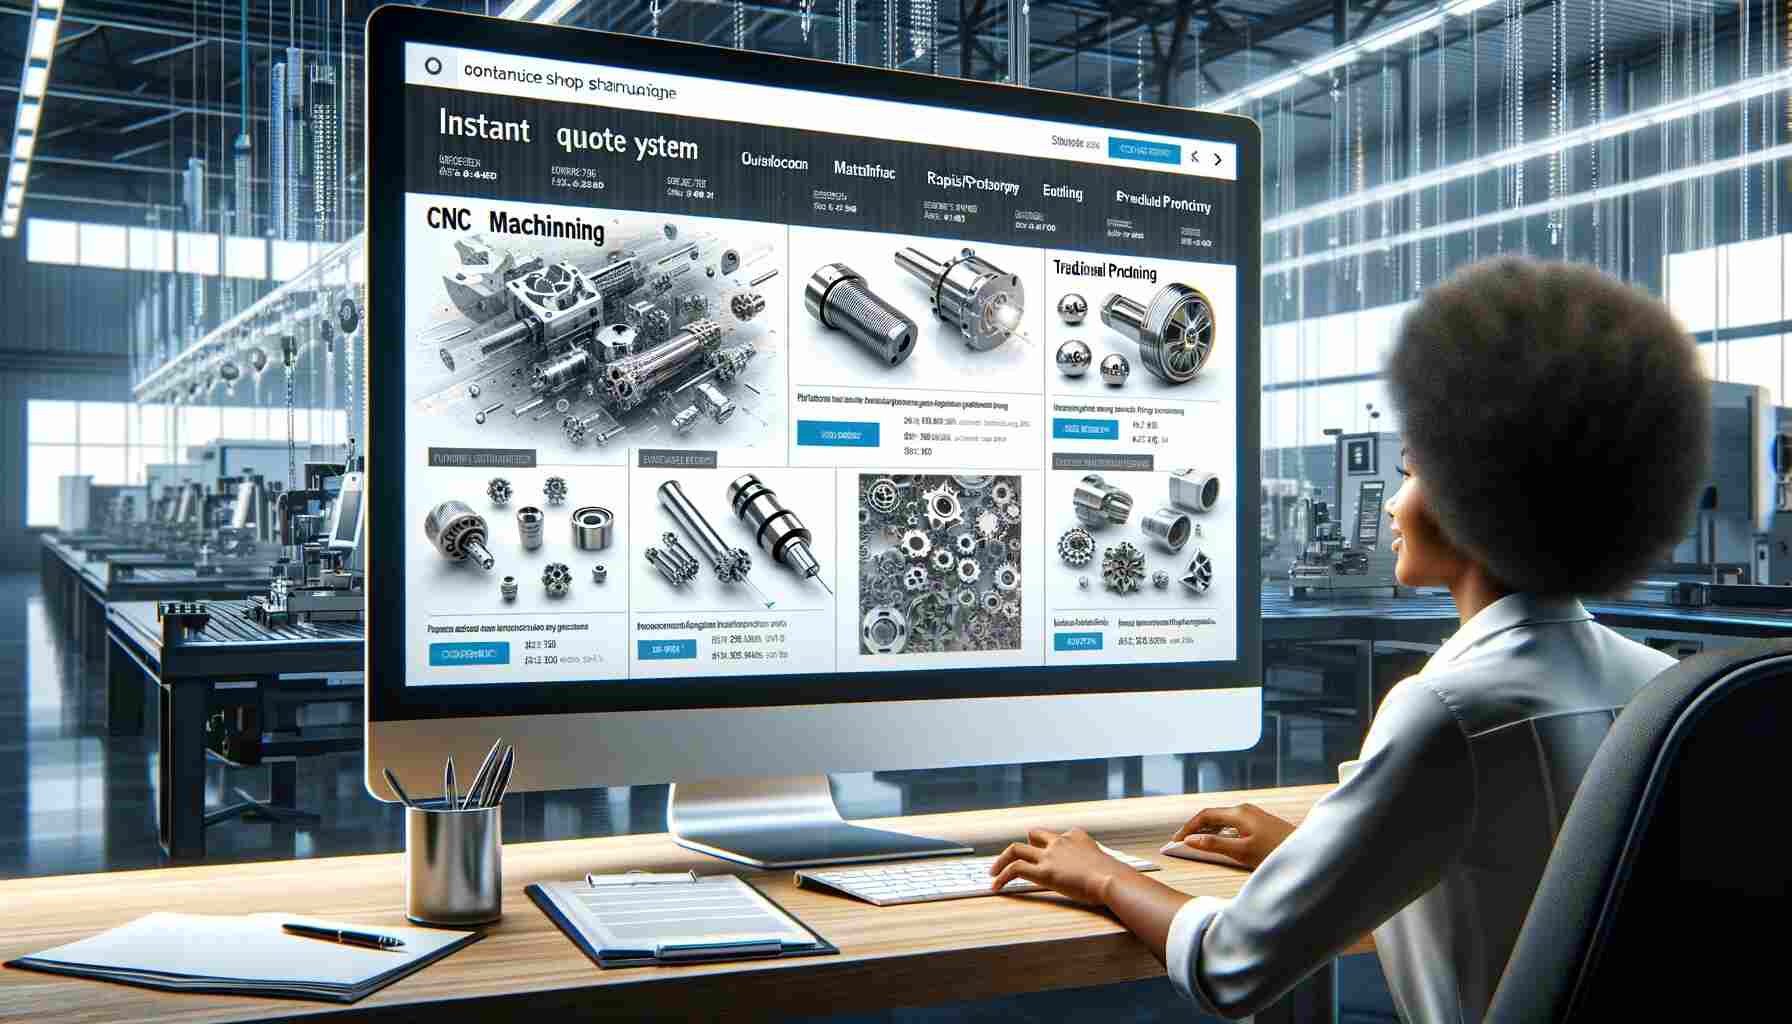 Machine shops offering online instant quotes provide a wide range of manufacturing processes.